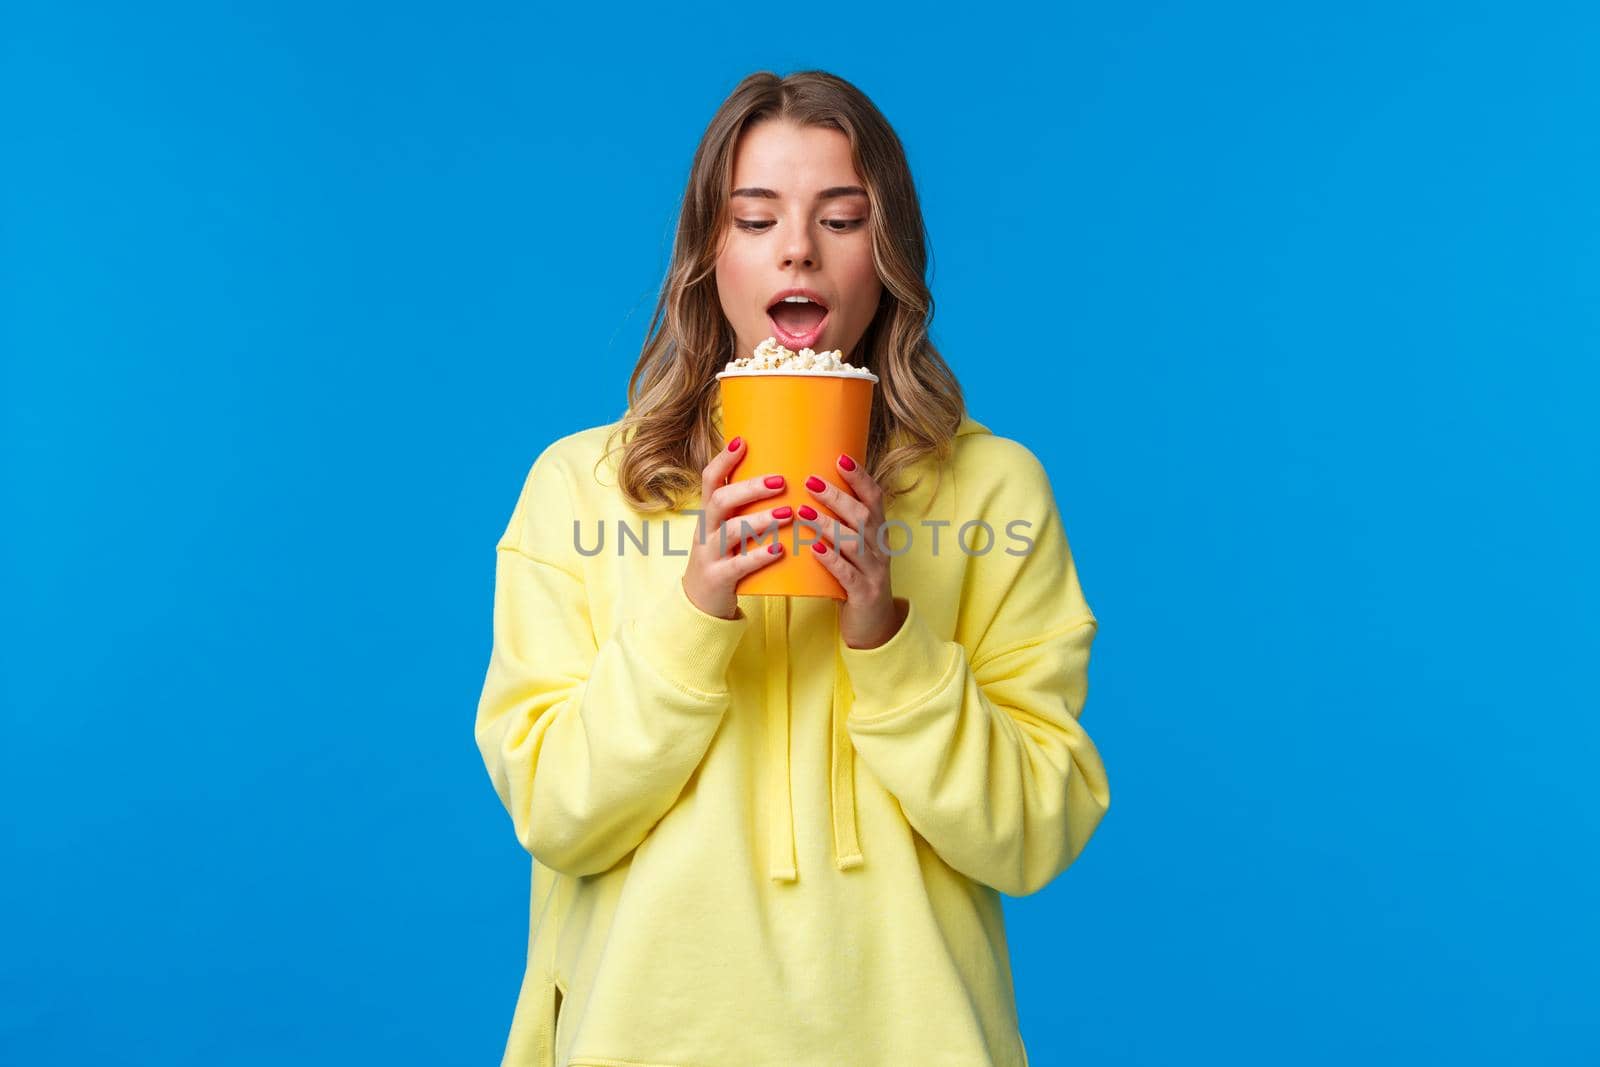 Leisure, fun and youth concept. Girl likes eating popcorn in cinema, have bite and staring at can with desire, watching movie, standing blue background in yellow hoodie. Copy space